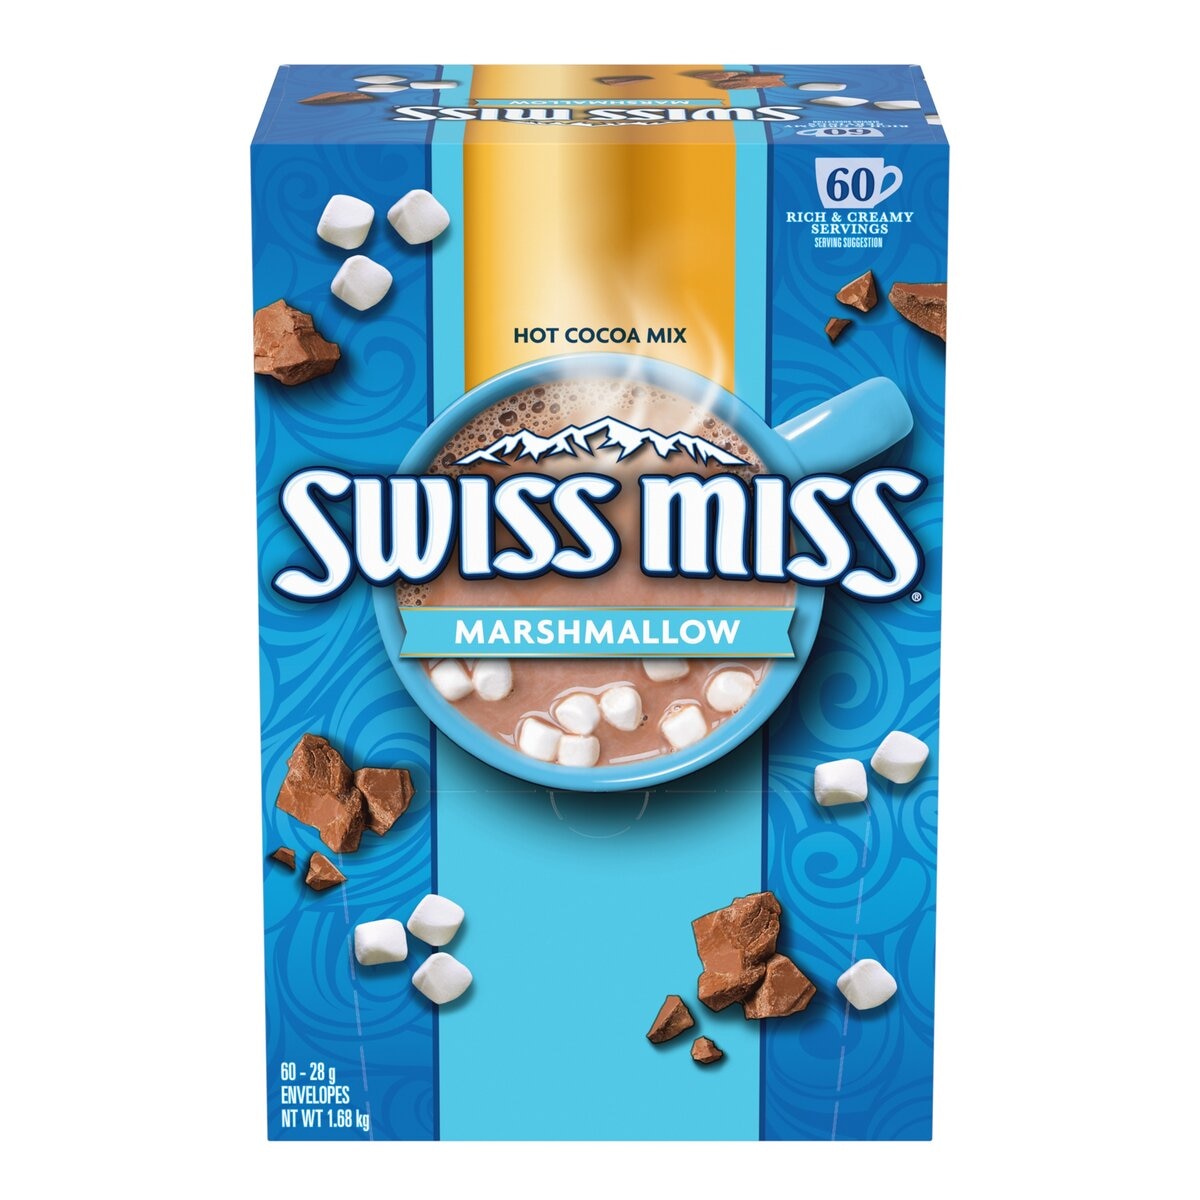 Swiss Miss Hot Cocoa Mix with Marshmallow 28 g X 60-Count